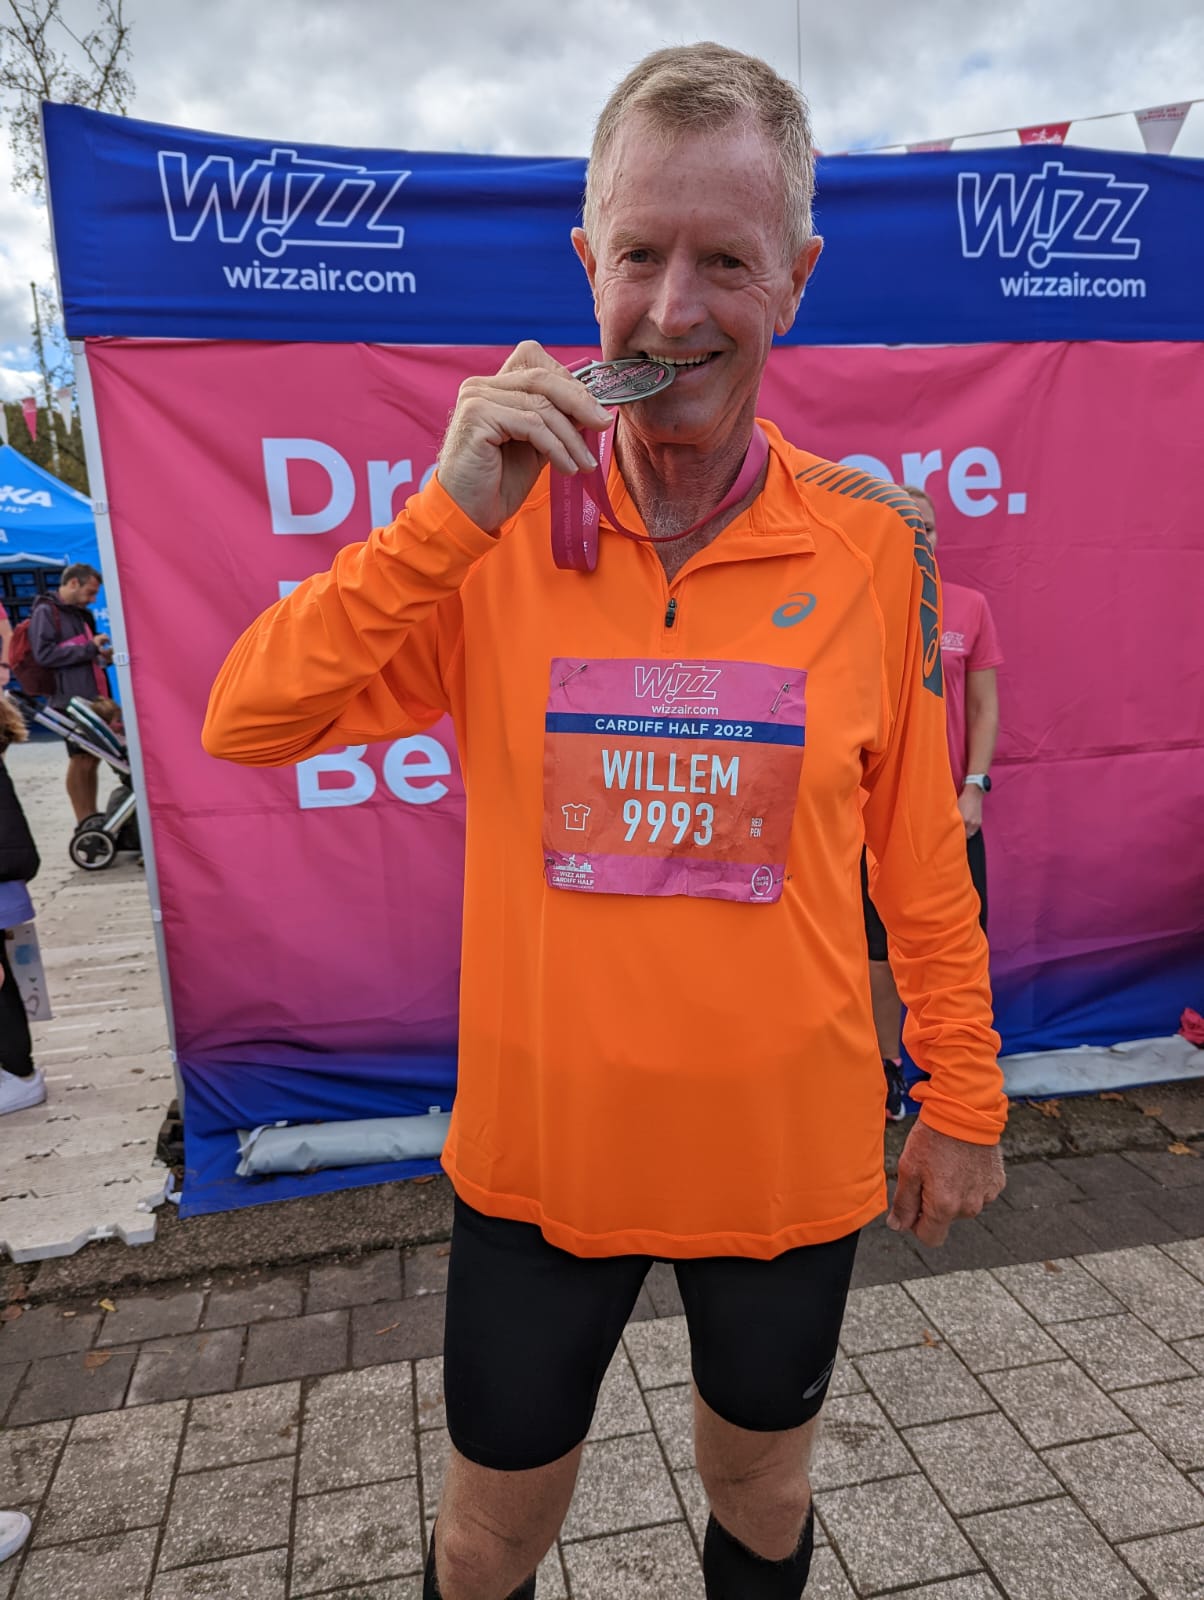 Wil, has just run the Cardiff Half Marathon. He's wearing his medal and biting down on it.